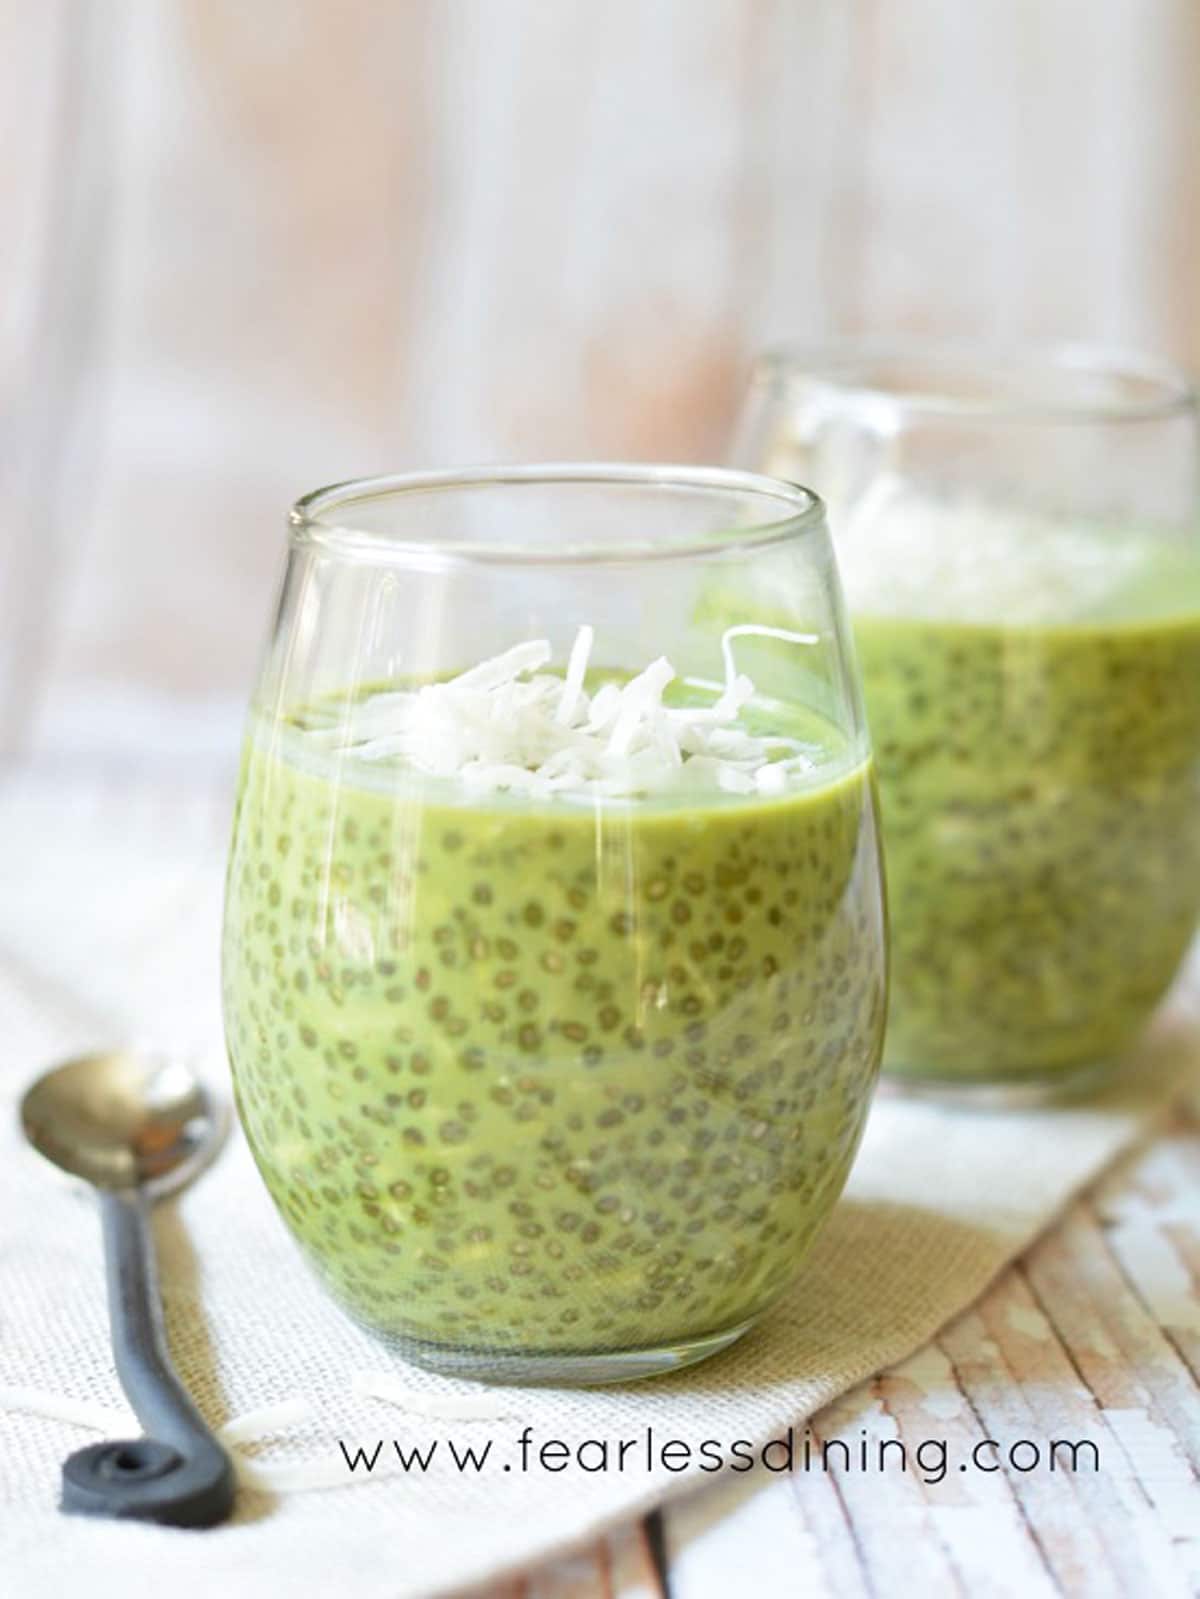 Two wine glasses filled with matcha chia pudding. Each is garnished with shredded coconut.